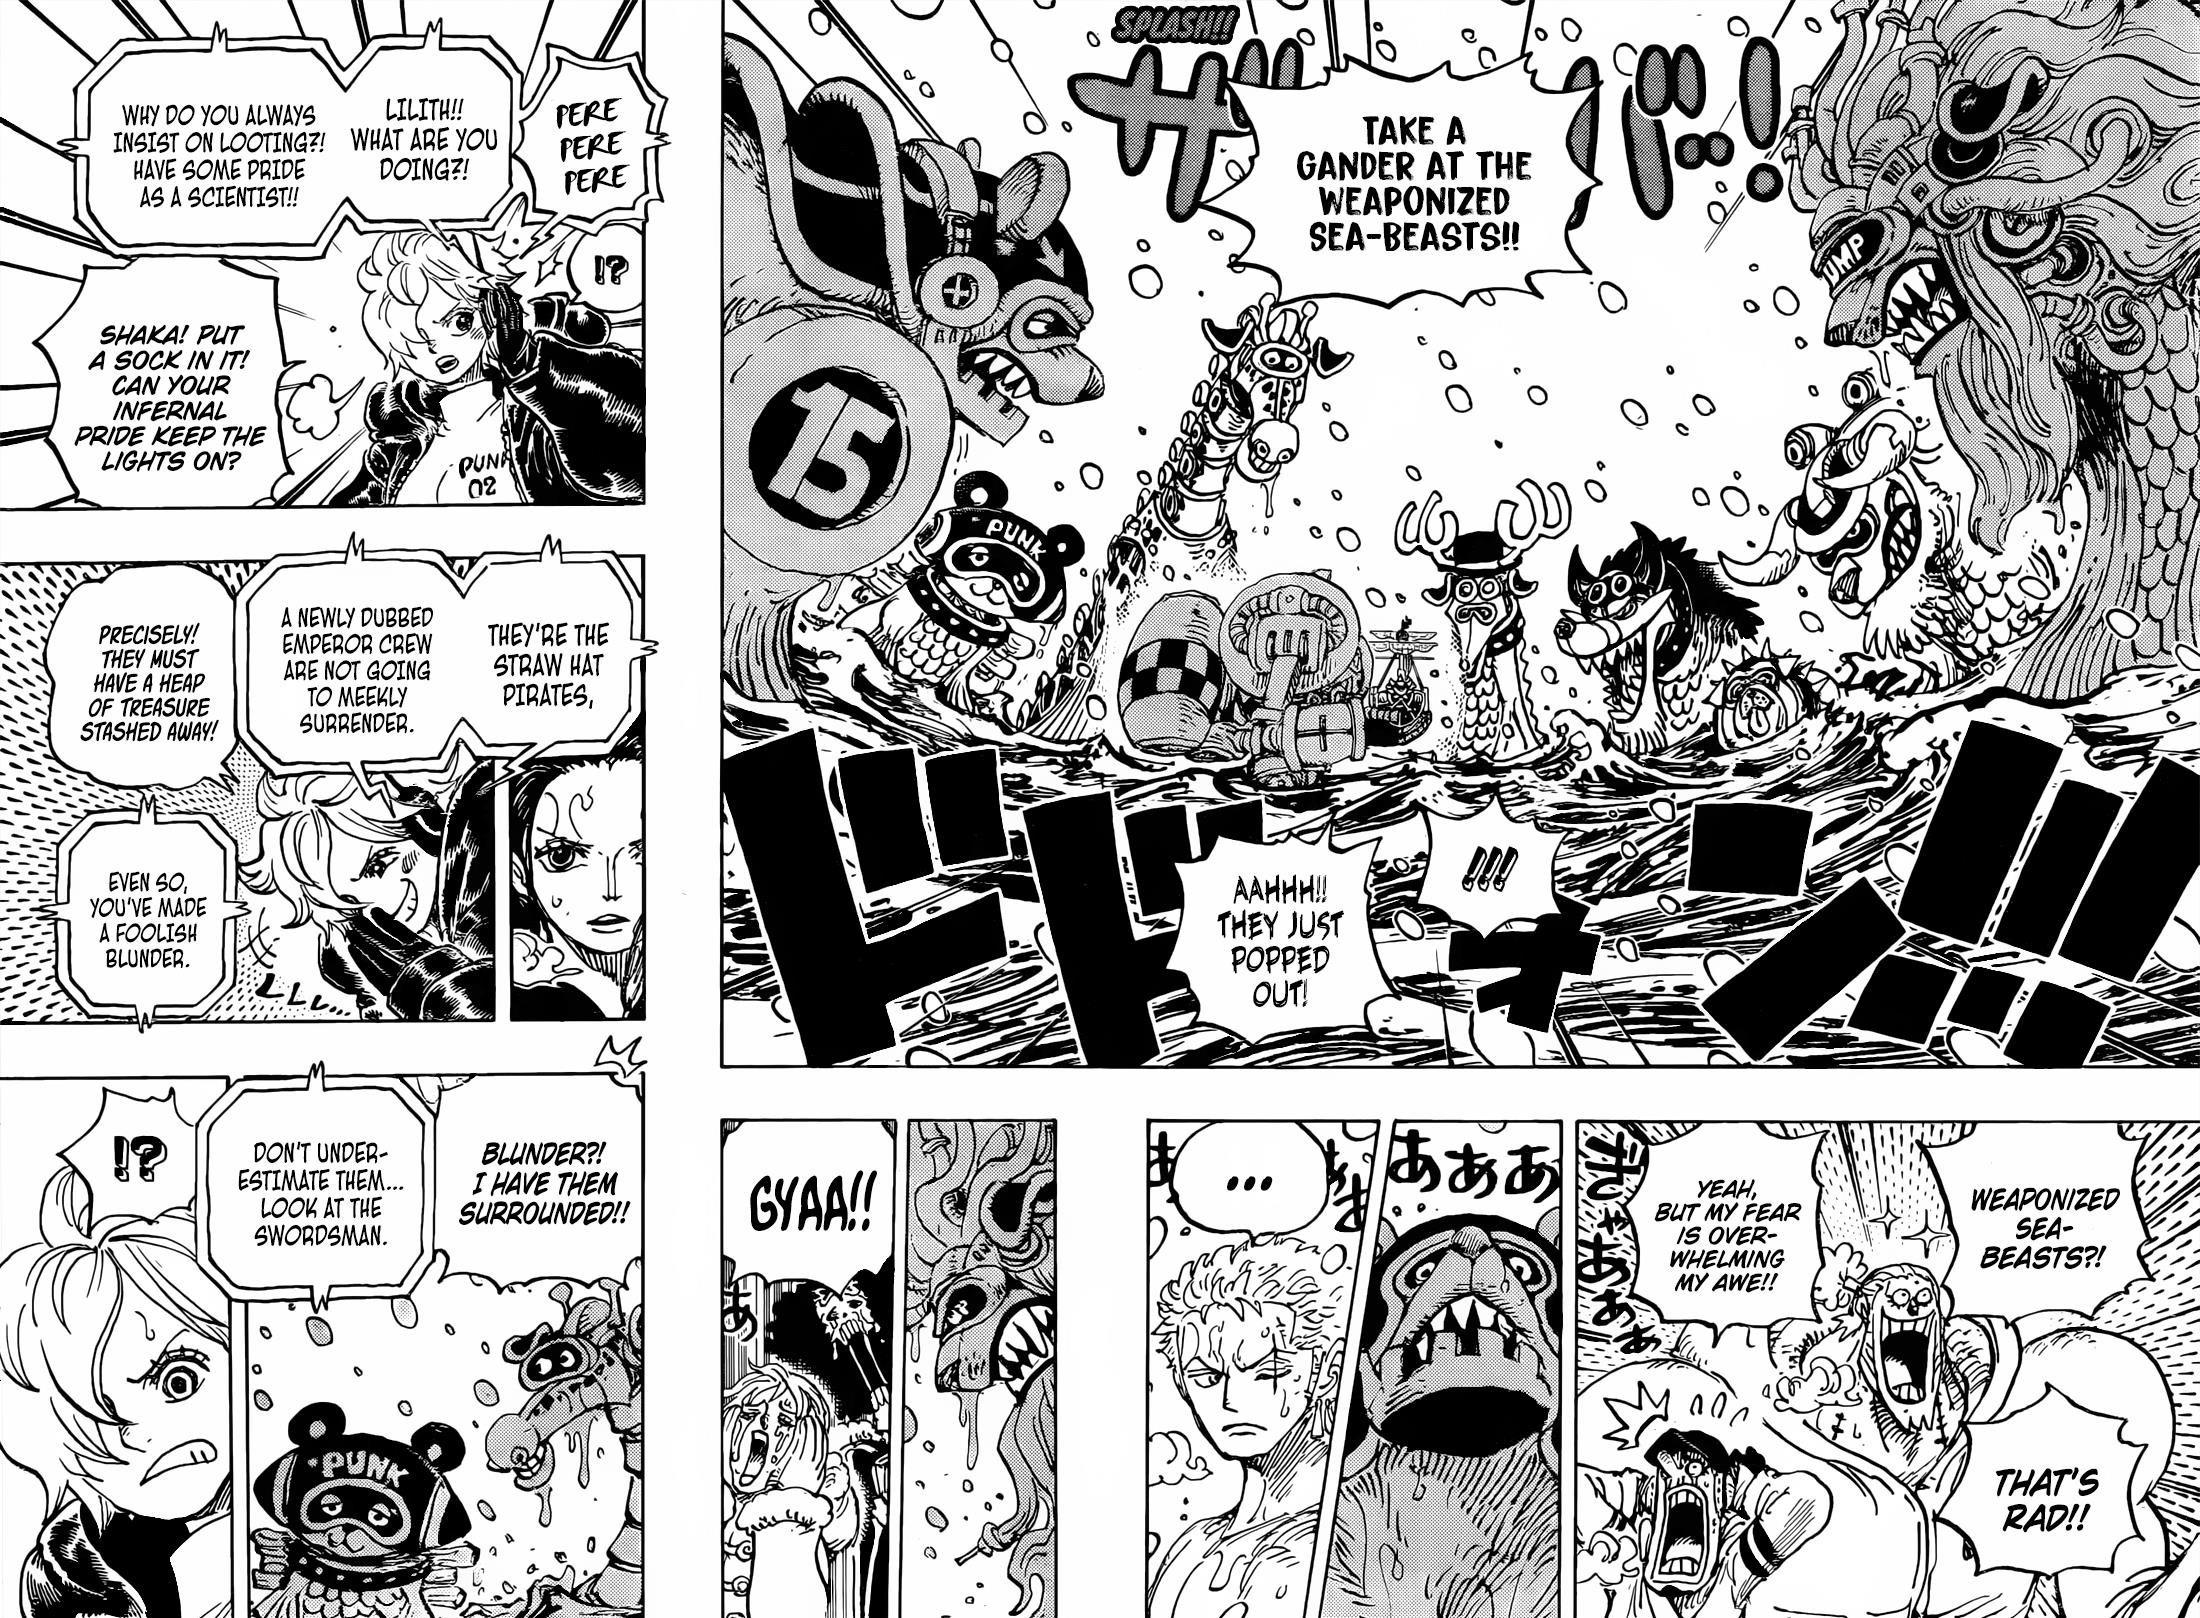 One Piece Chapter 1062 (Full Spoilers): The Vegapunks explained, a